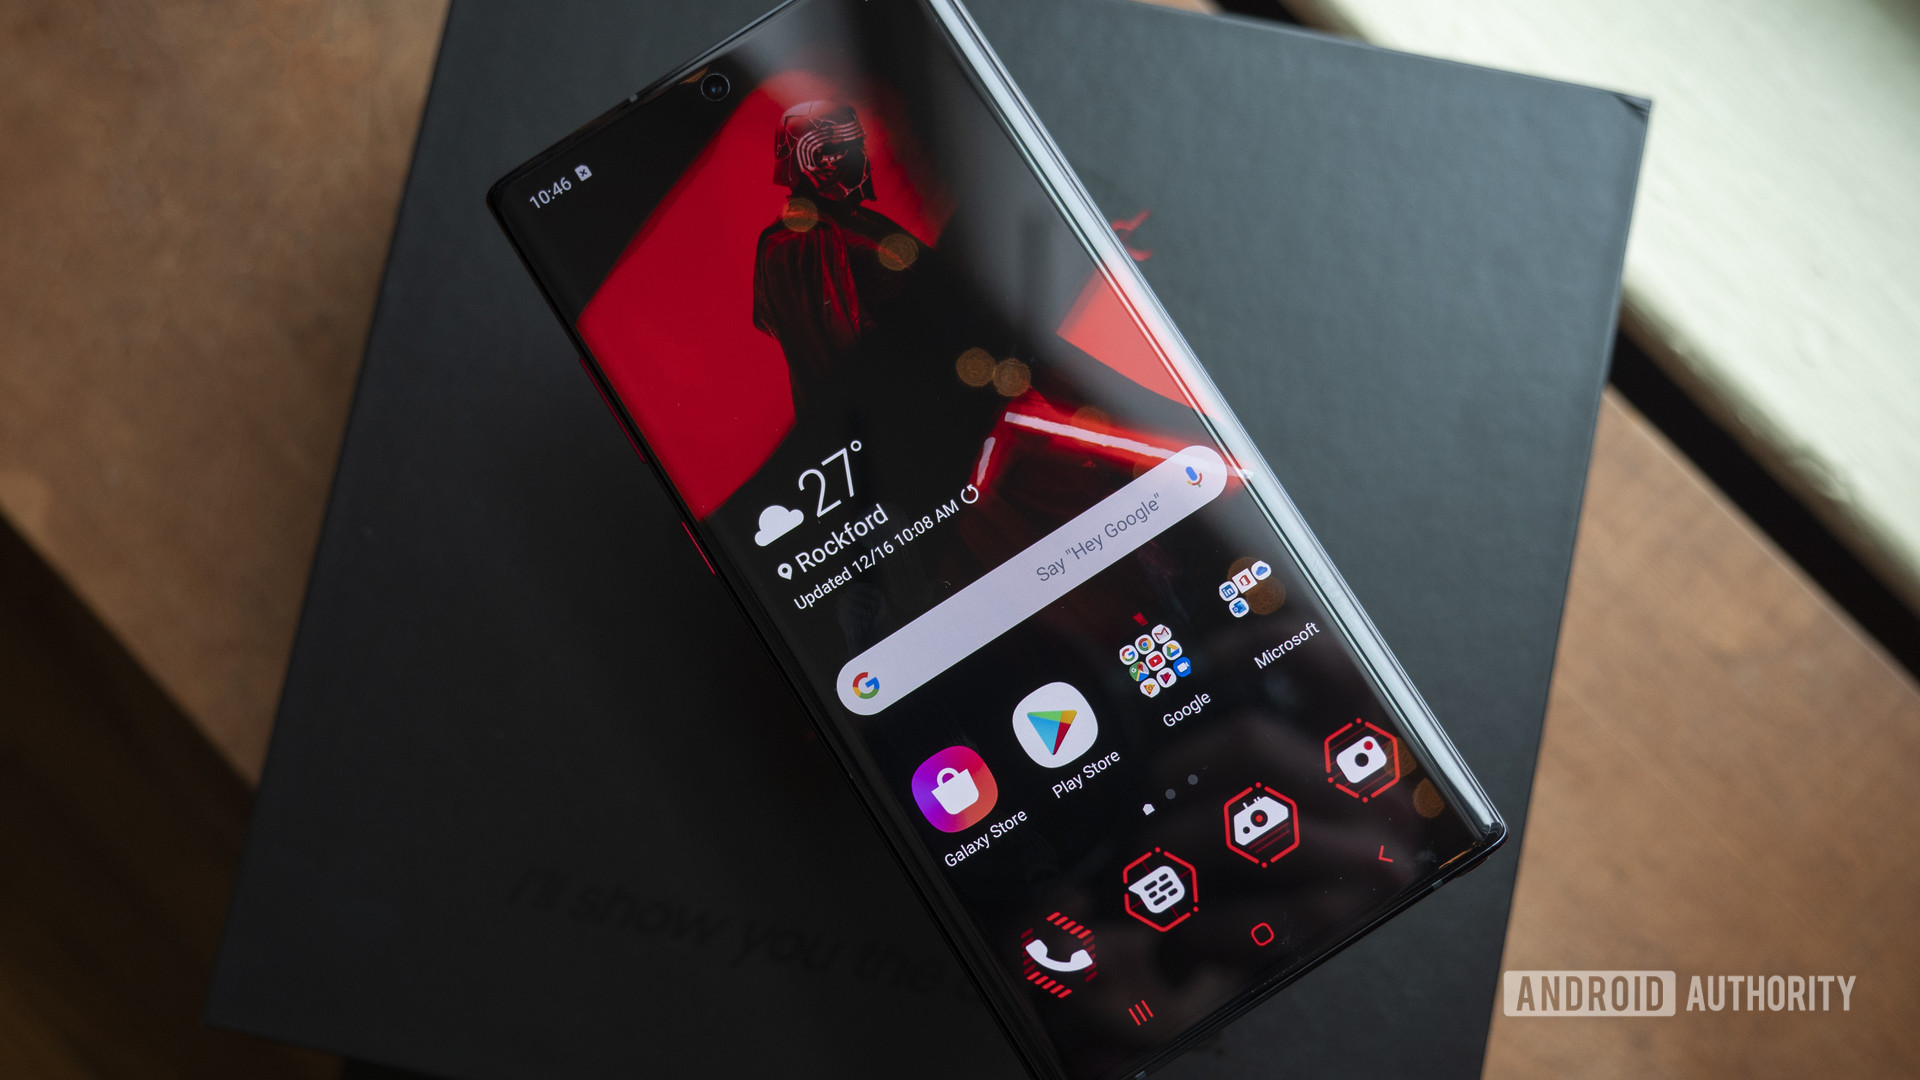 Samsung Galaxy Note 10 Plus Star Wars Edition review - Android Authority